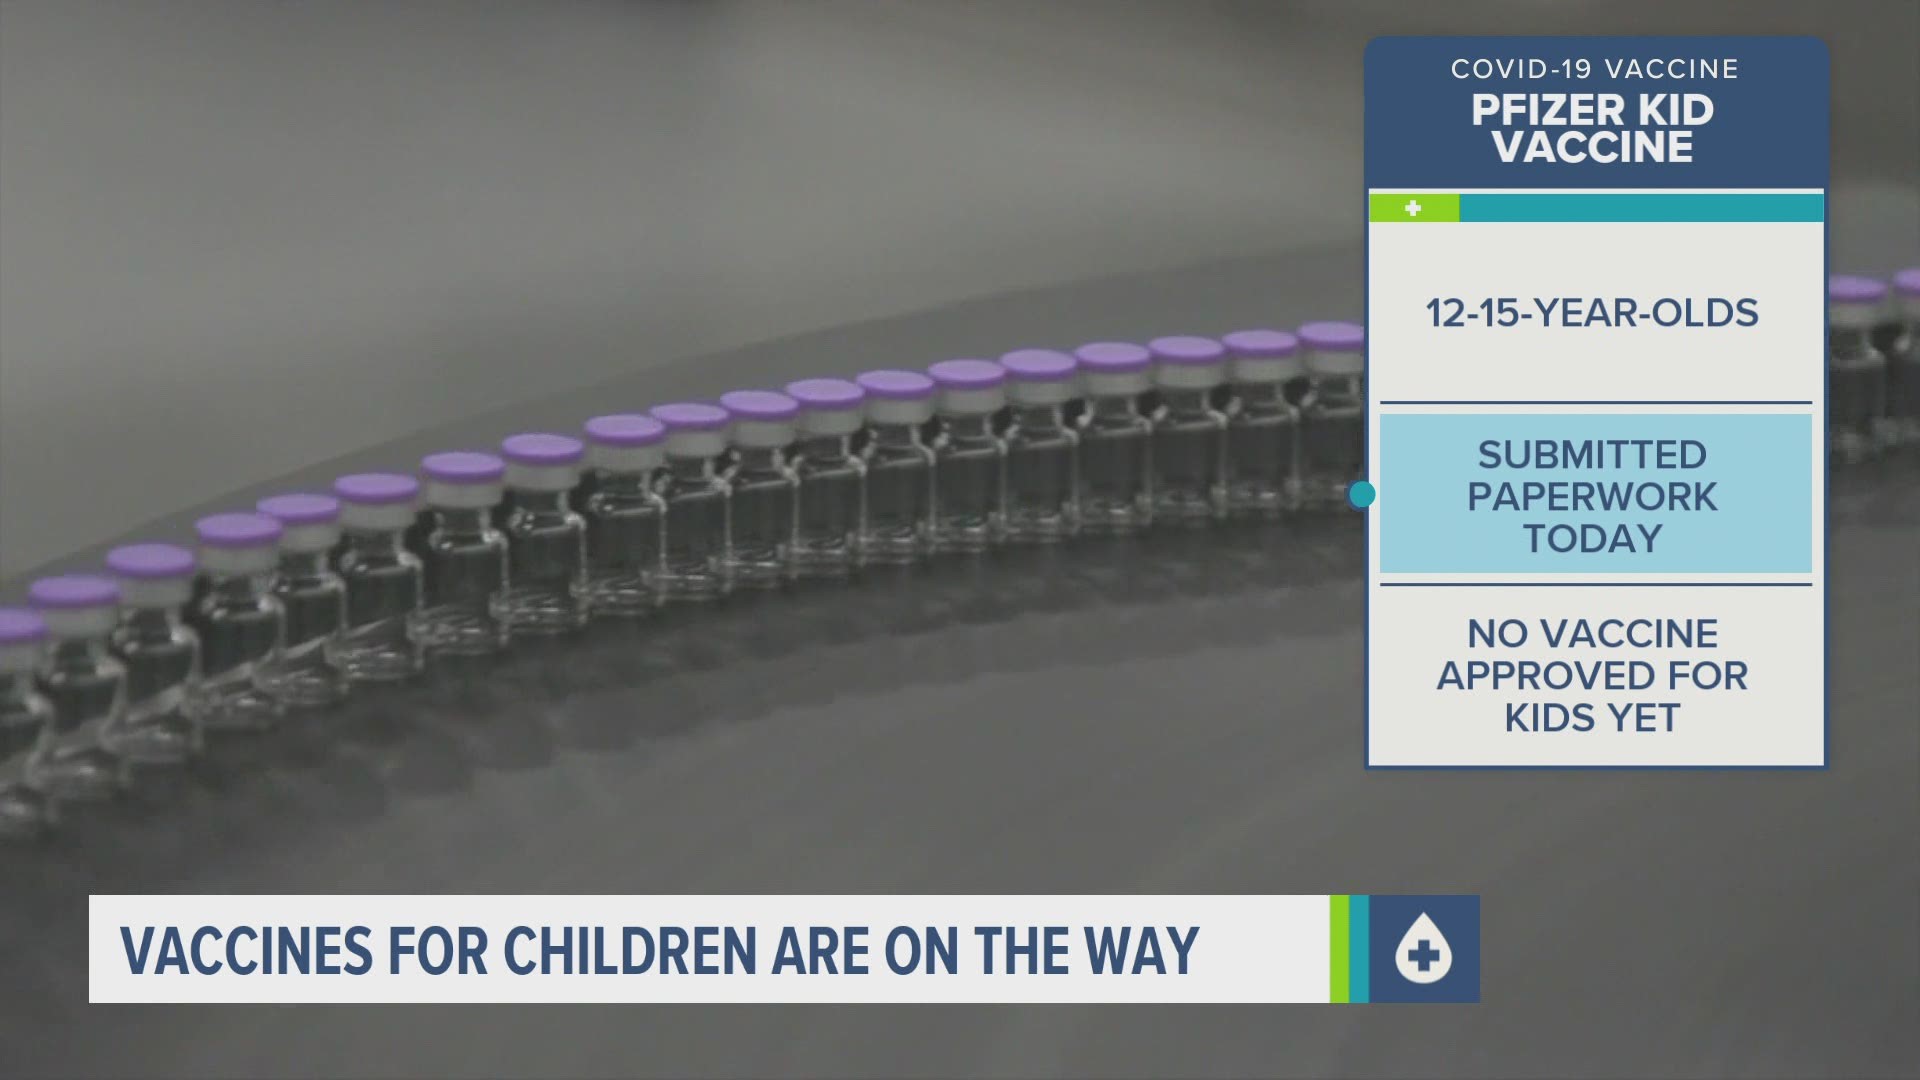 Pfizer said it hopes to make its COVID-19 vaccine available to kids in the 12 to 15-year-old age group before the start of the 2021 school year.